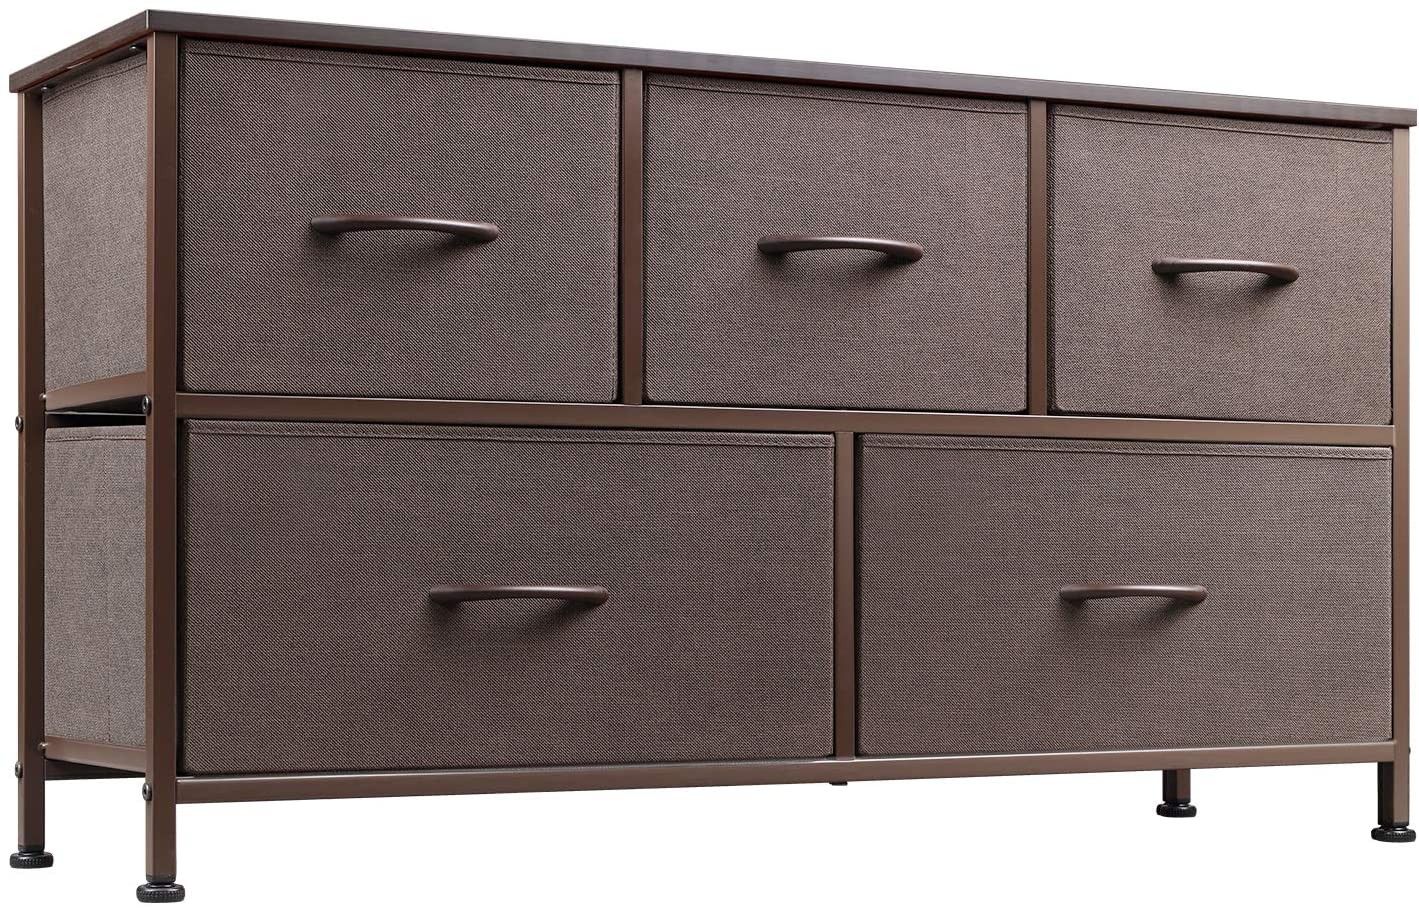 Dresser with 5 Drawers, Fabric Storage Tower, Organizer Unit for Bedroom, Hallway, Entryway, Closets, Sturdy Steel Frame, Wood Top